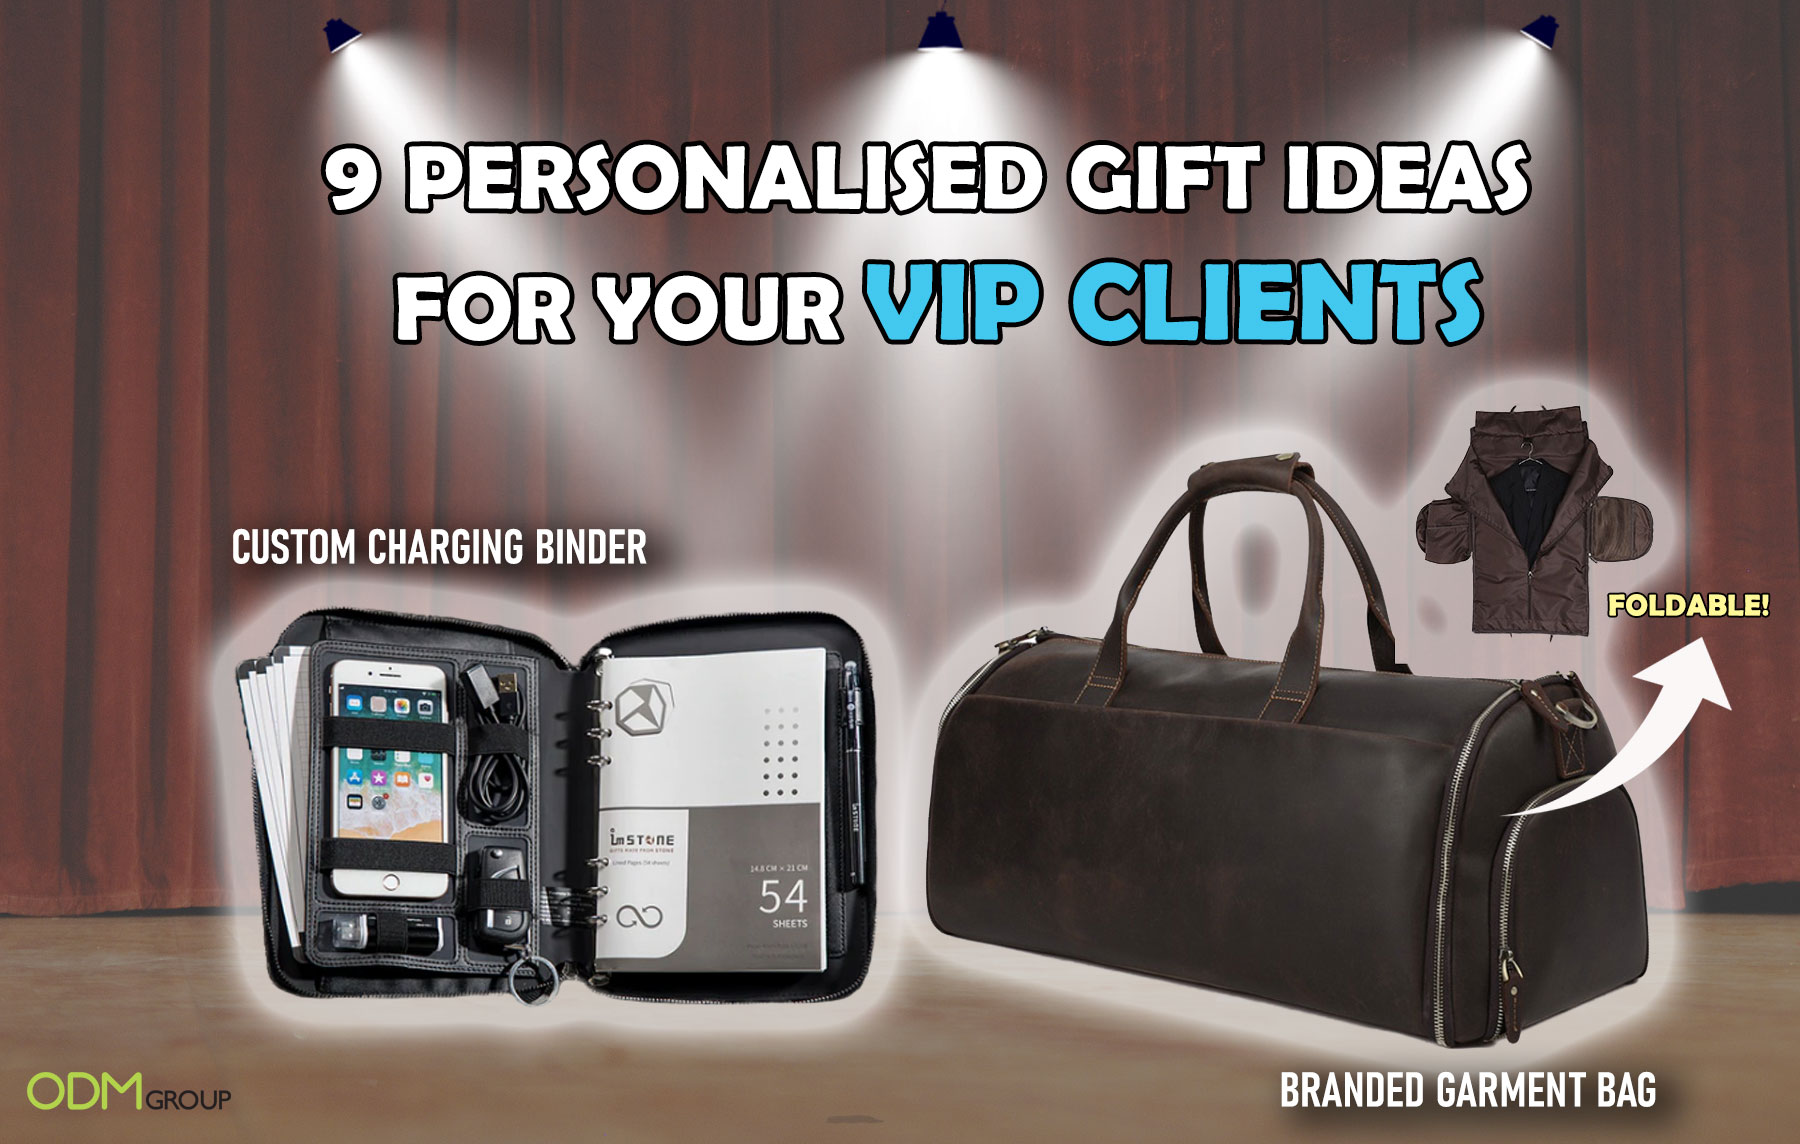 15 Corporate Gift Ideas for Your Clients or Employees in Malaysia - Bello  Bello